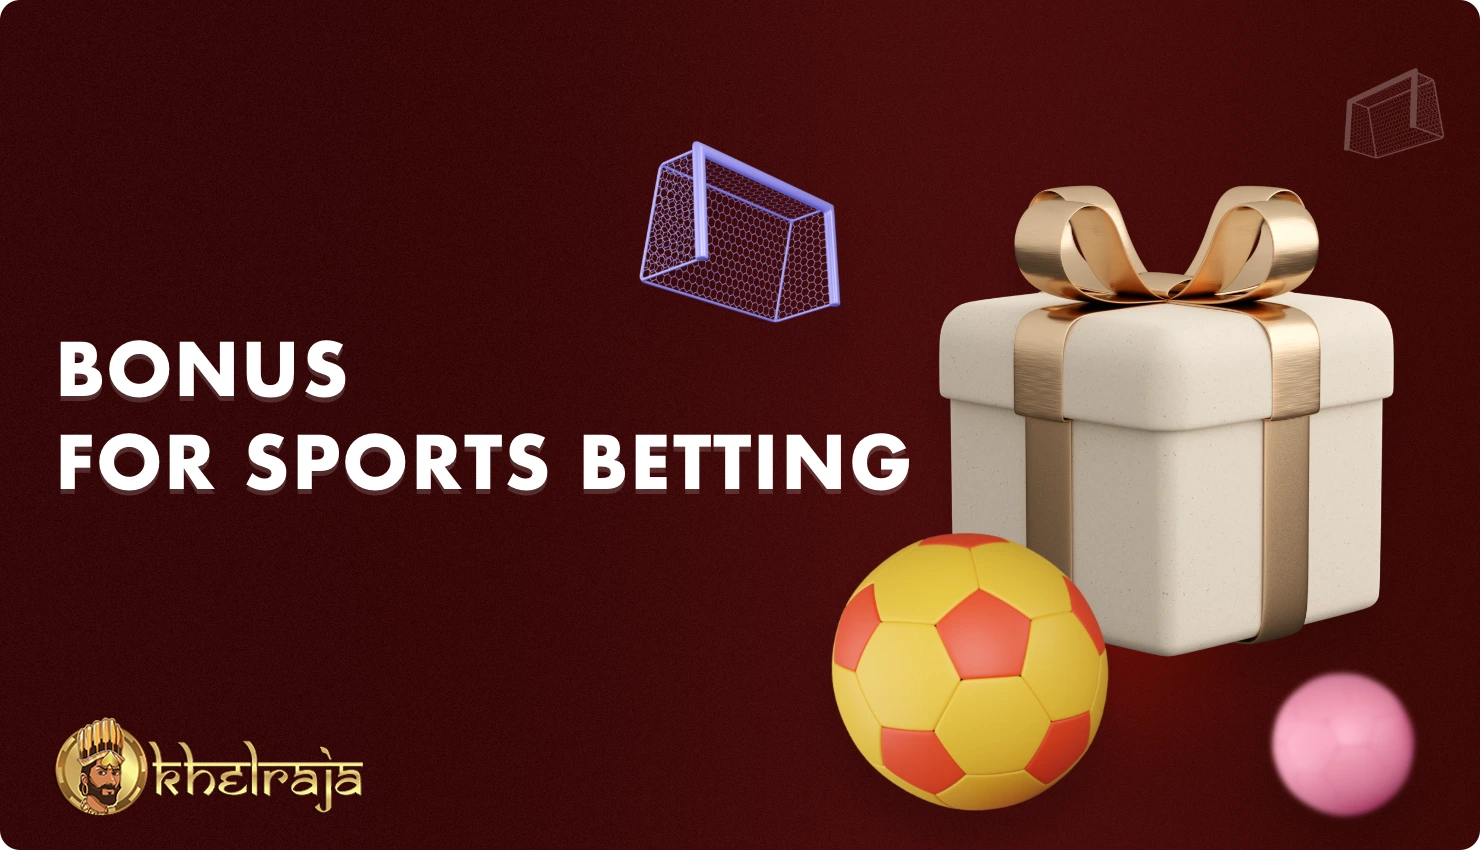 Khelraja Sports Welcome Bonus allows new players from India to get a sports betting bonus